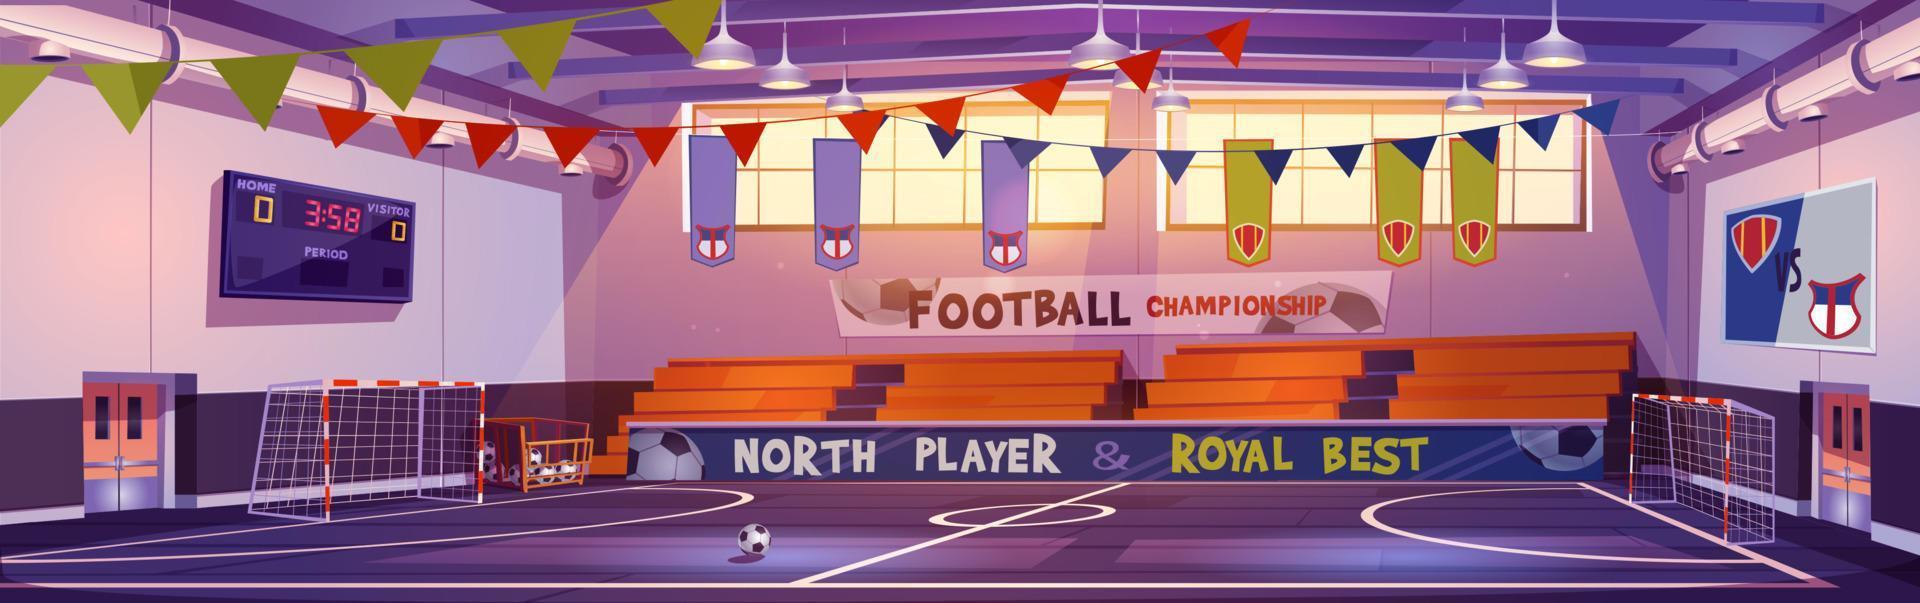 School court interior for soccer or football game vector